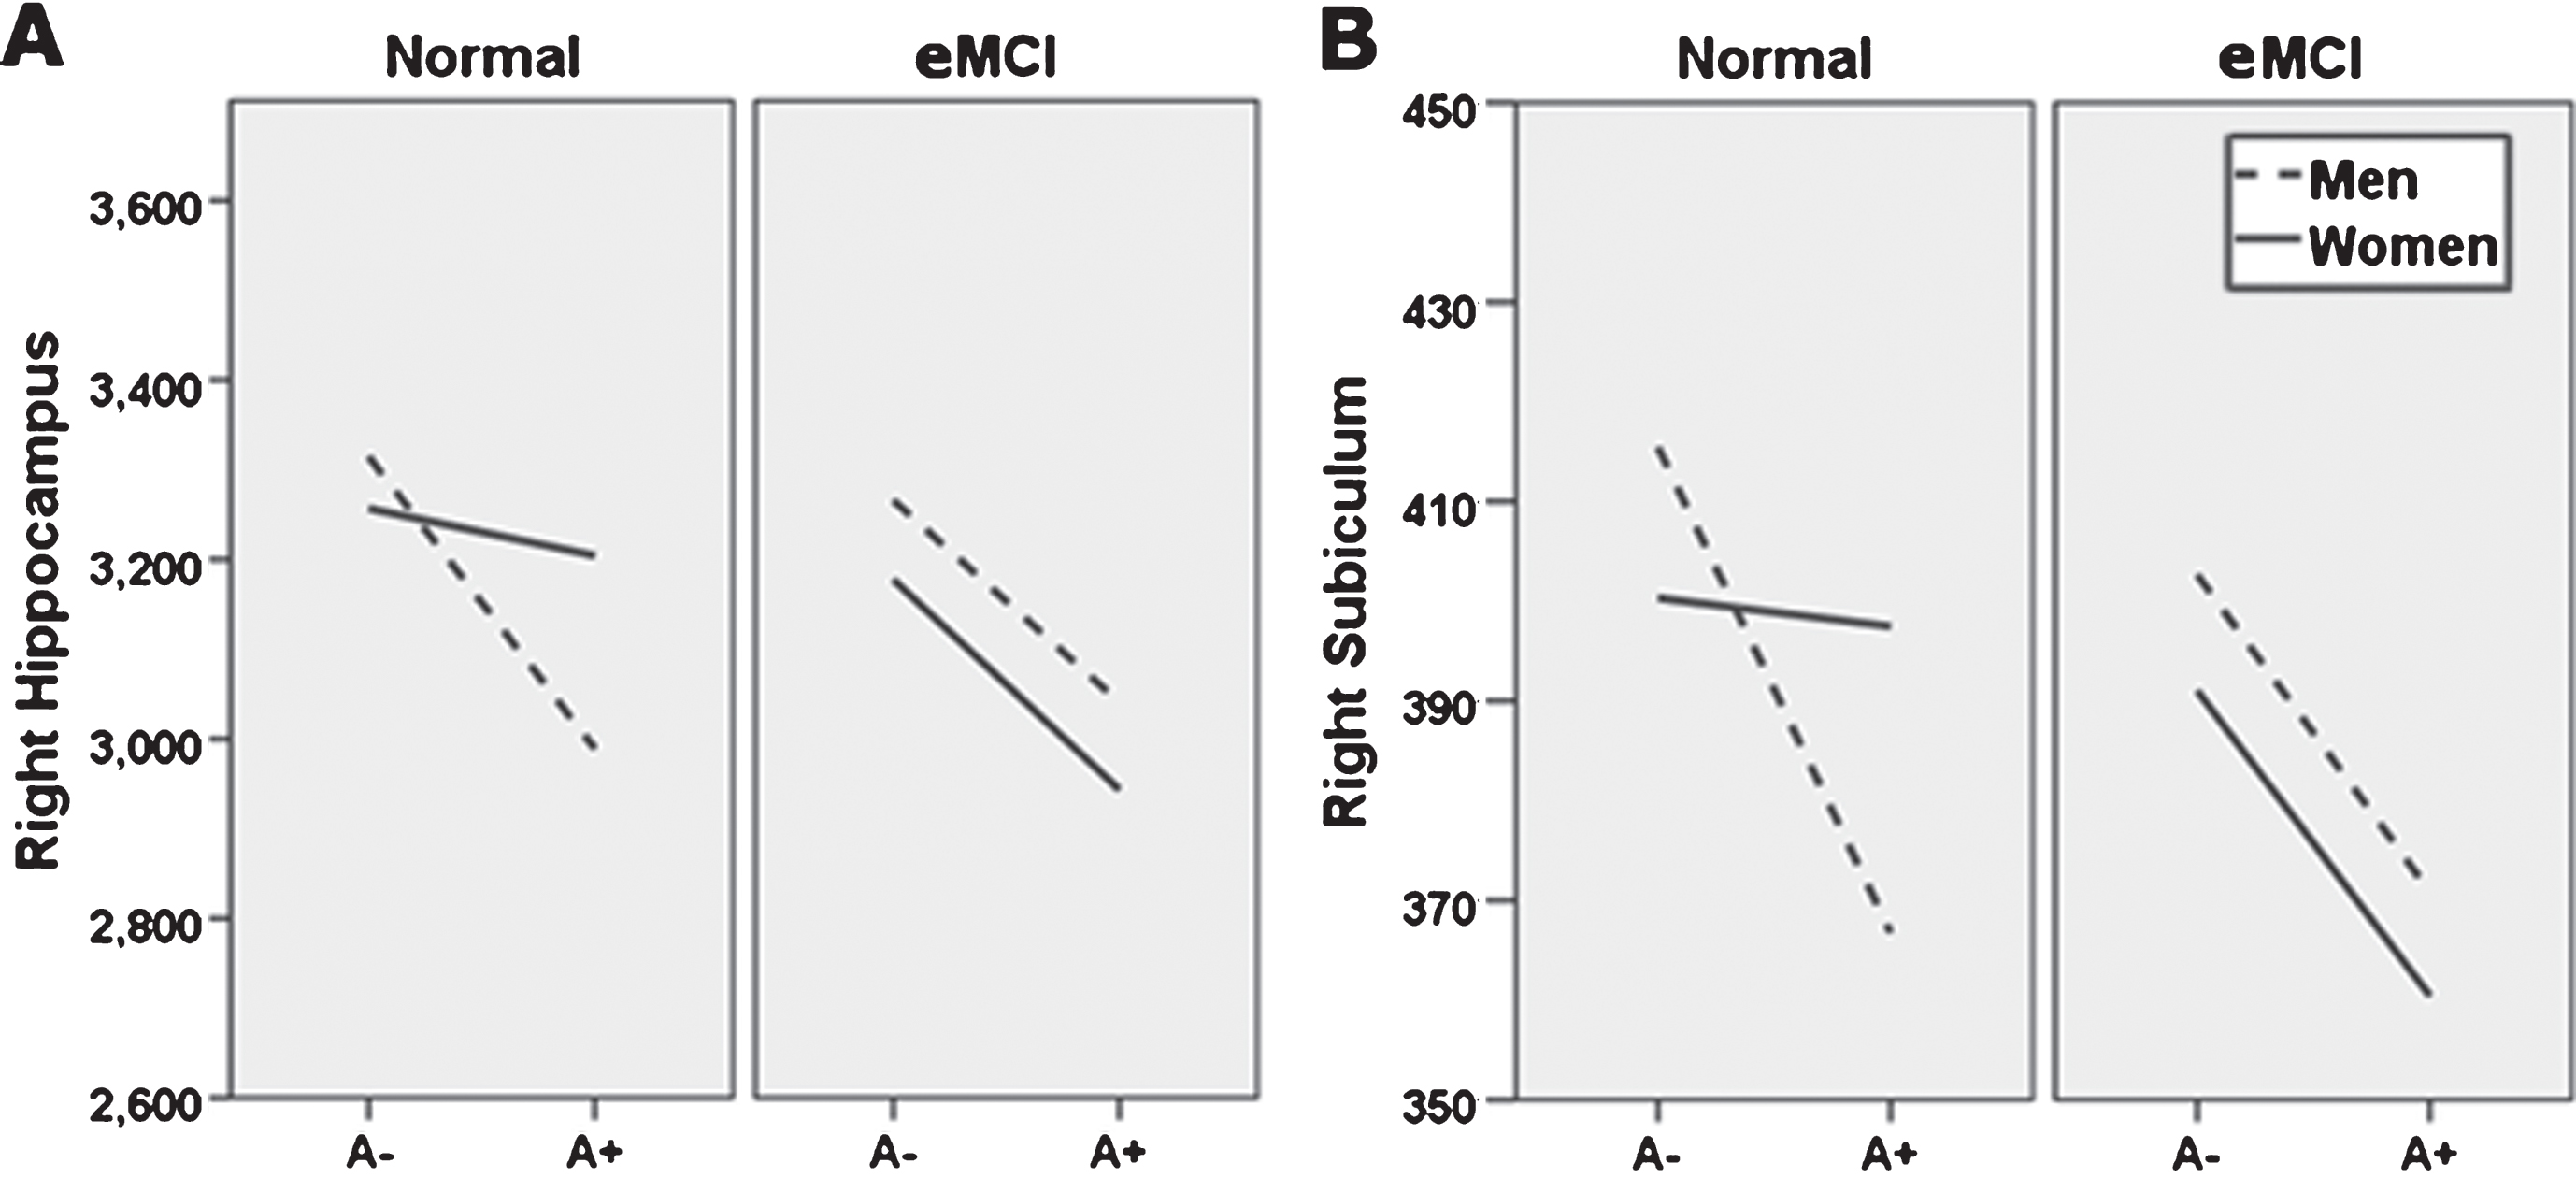 Sex moderation of diagnosis and amyloid status effects. Sex moderates effects of diagnosis and Florbetapir PET amyloid positivity (A+) on right whole hippocampal volume (A), and right subiculum (B). Specifically, normal control (NC) women with A+ show whole and subfield volumes more comparable to NC women with a negative amyloid PET (A−), while NC men do not. At the early mild cognitive impairment (eMCI) stage, effects of A+ on total and subfield volume did not differ by sex, but generally related to smaller volumes across participants. A–, 18F-PET amyloid negative; A+, 18F-PET amyloid positive. For ease of viewing, hippocampus and subfield volume units are raw, uncorrected, in milimeters3.